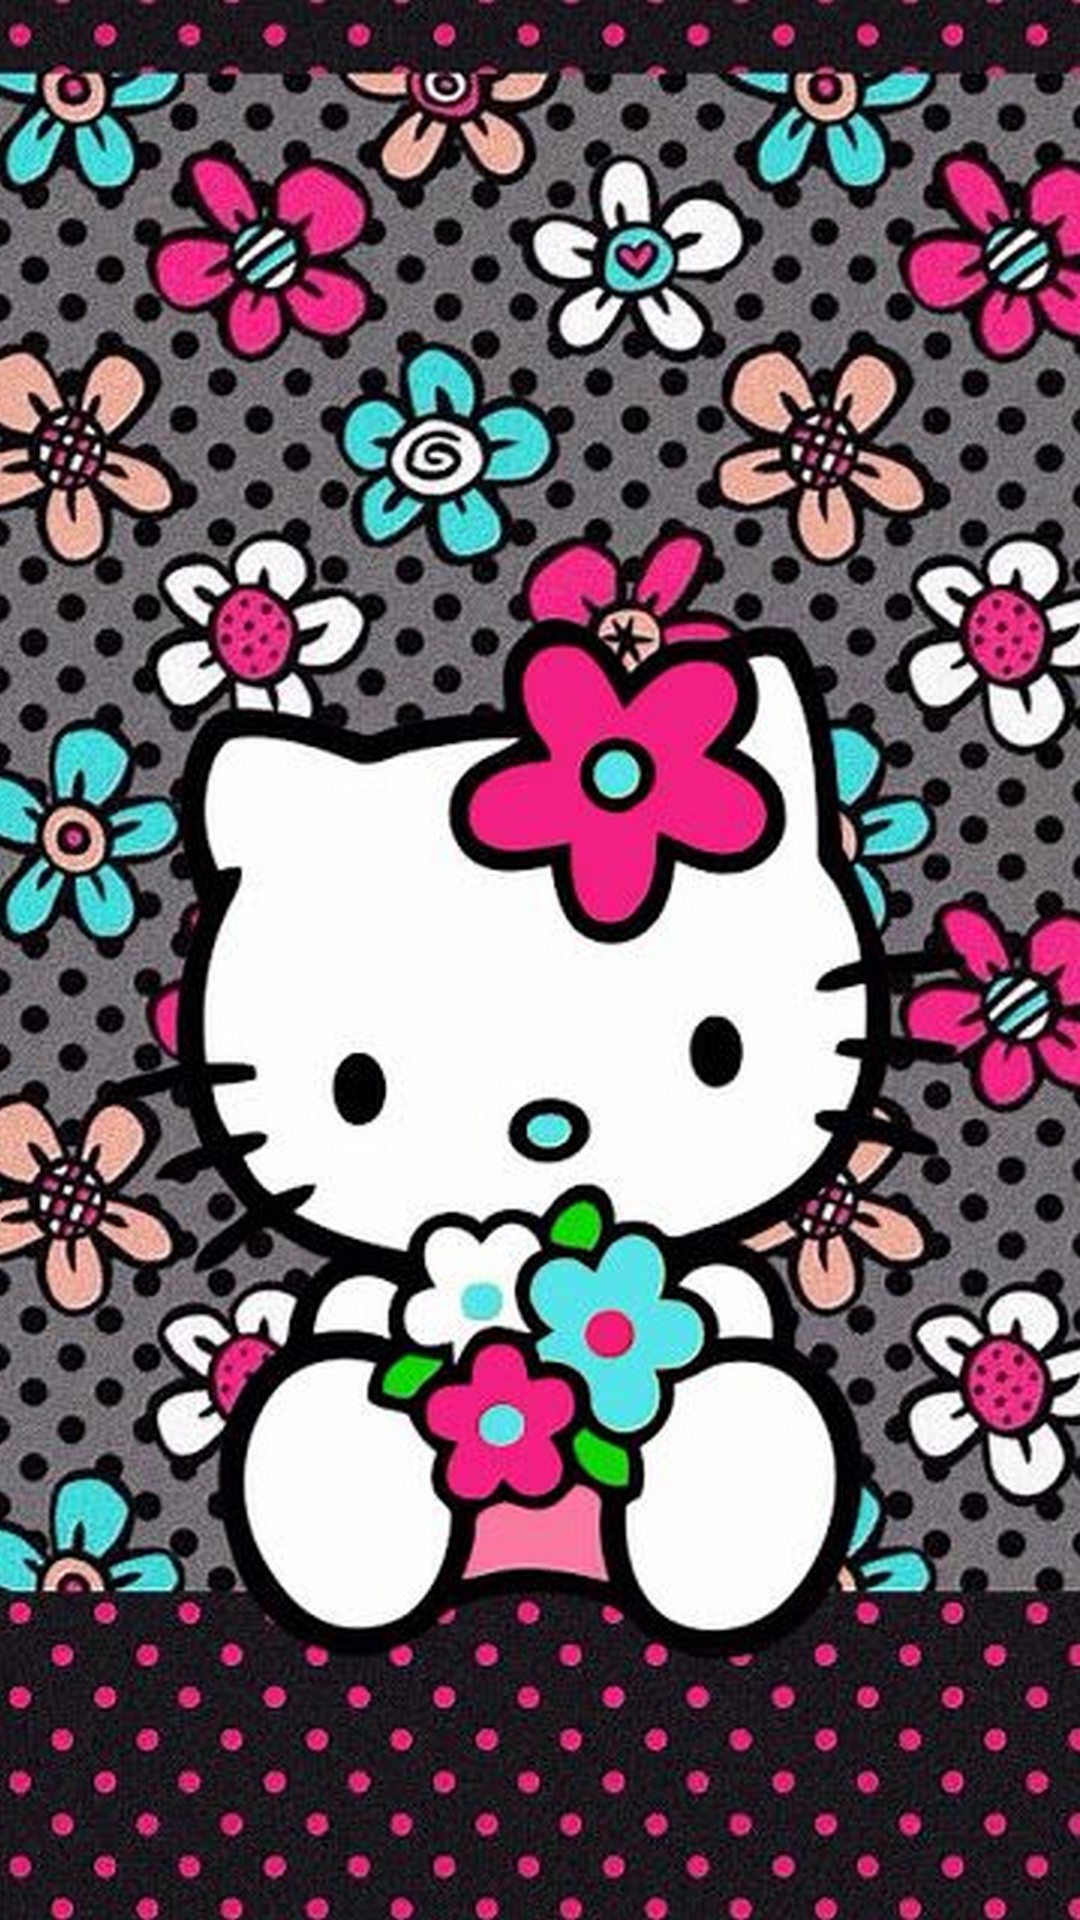 Wallpaper iPhone Hello Kitty Images | 2020 3D iPhone Wallpaper